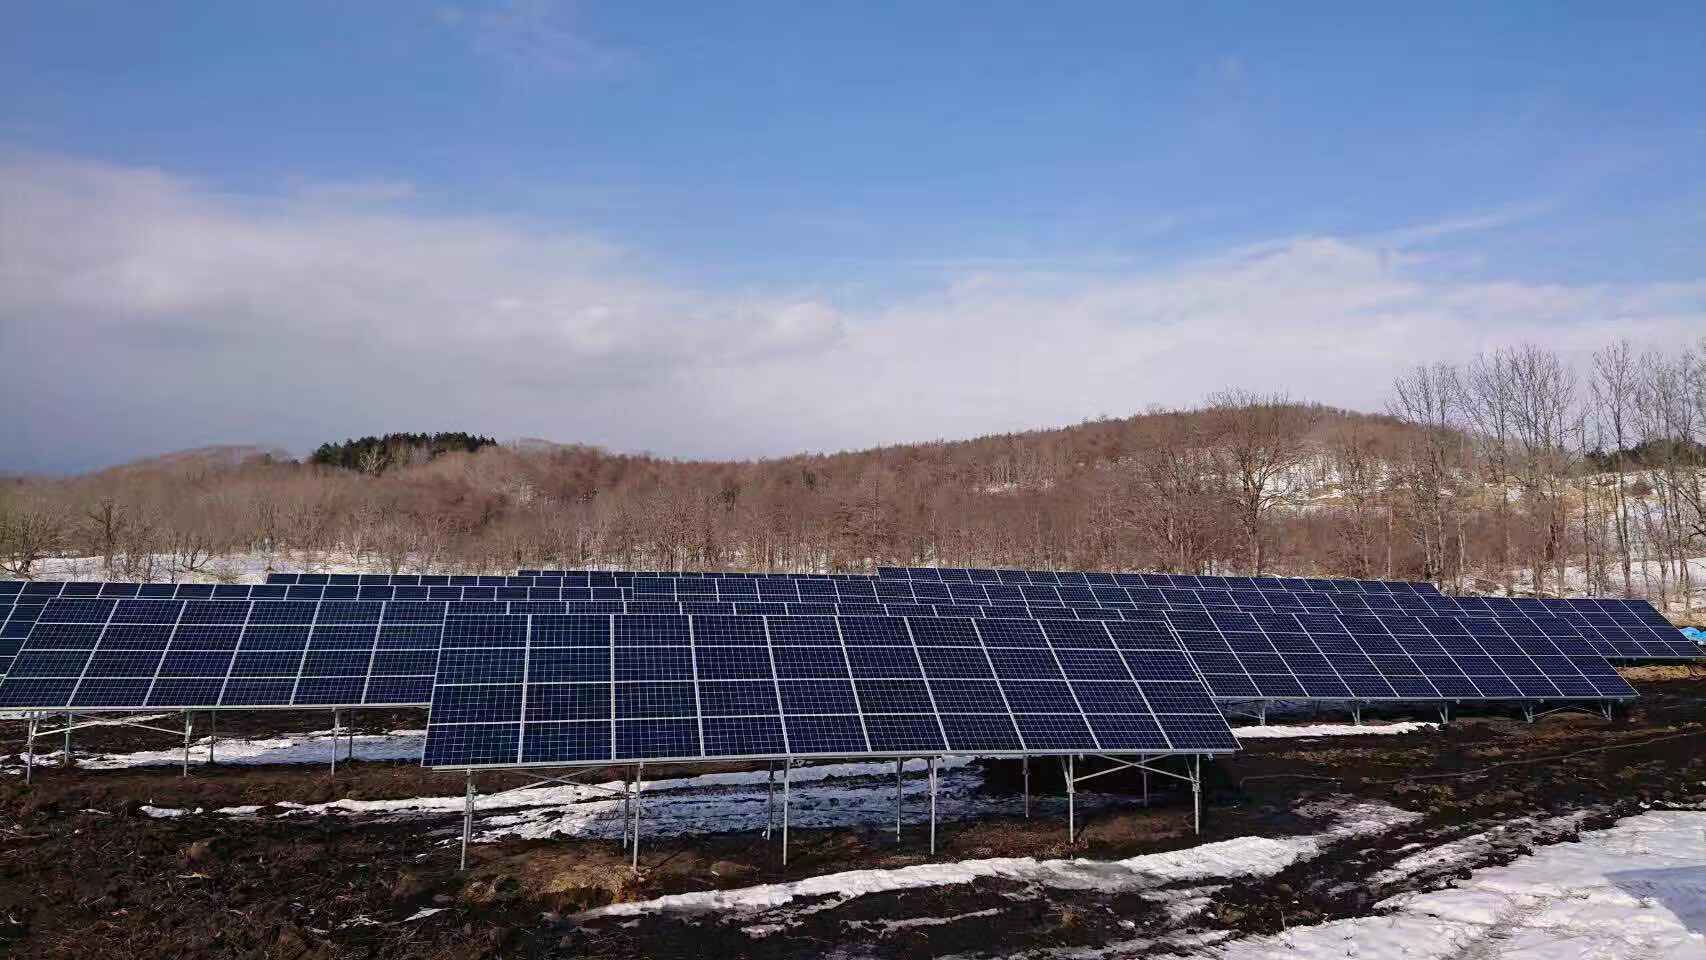 C-steel photovoltaic support system